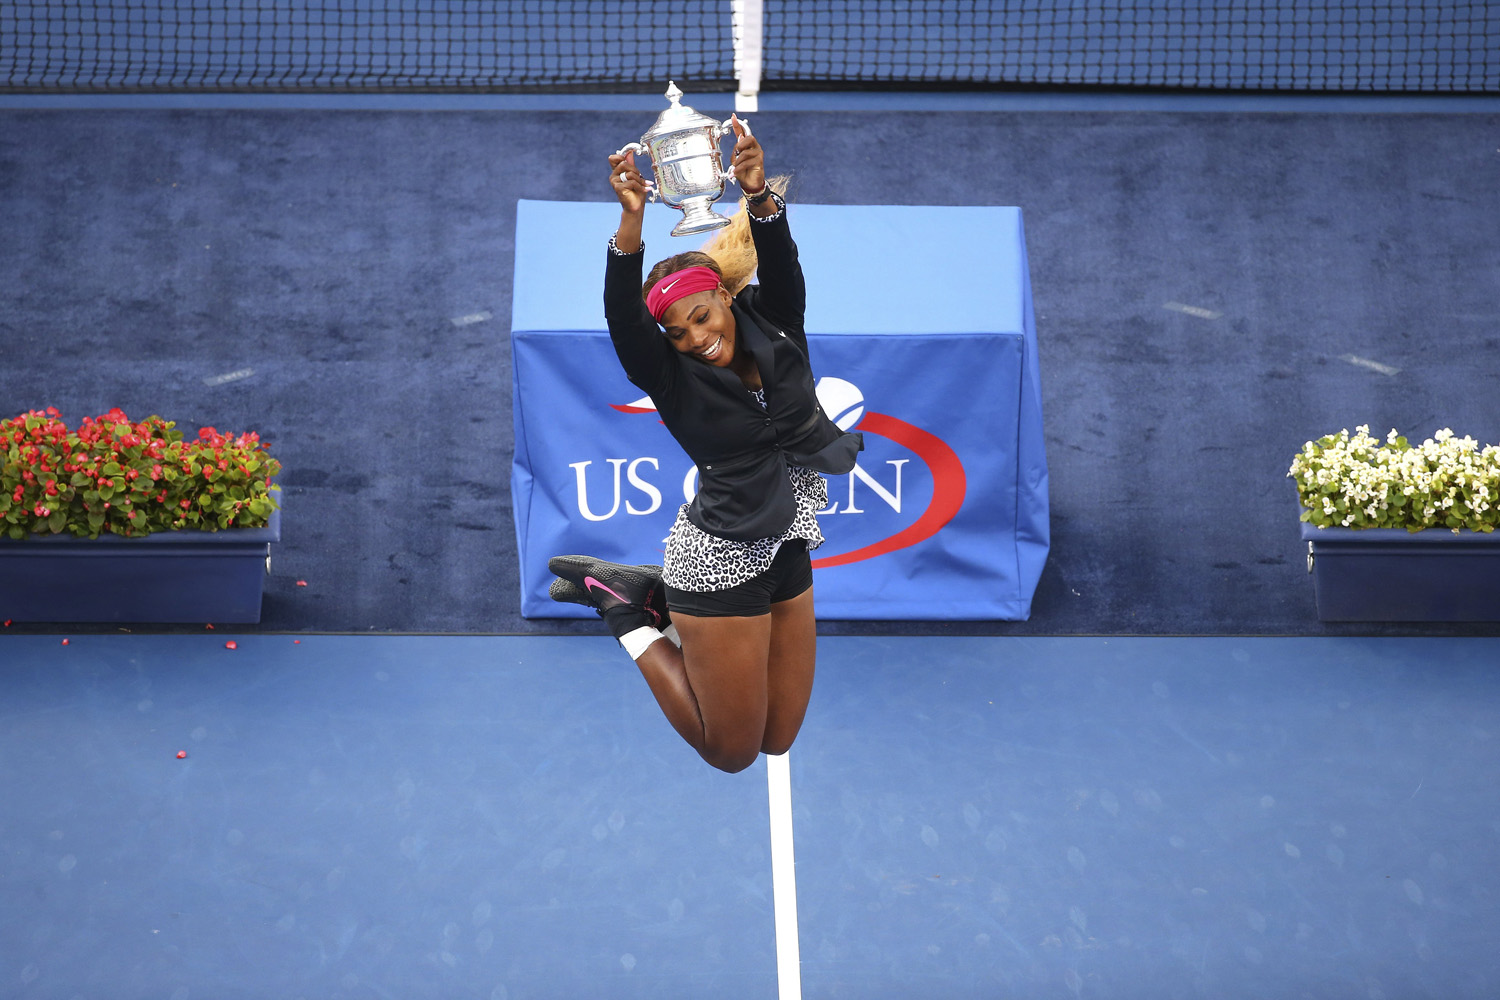 Serena Williams of the U.S. leaps with the trophy after defeating Caroline Wozniacki of Denmark in the womenís singles final at the U.S. Open tennis tournament in Arthur Ashe Stadium in New York on Sept. 7, 2014.